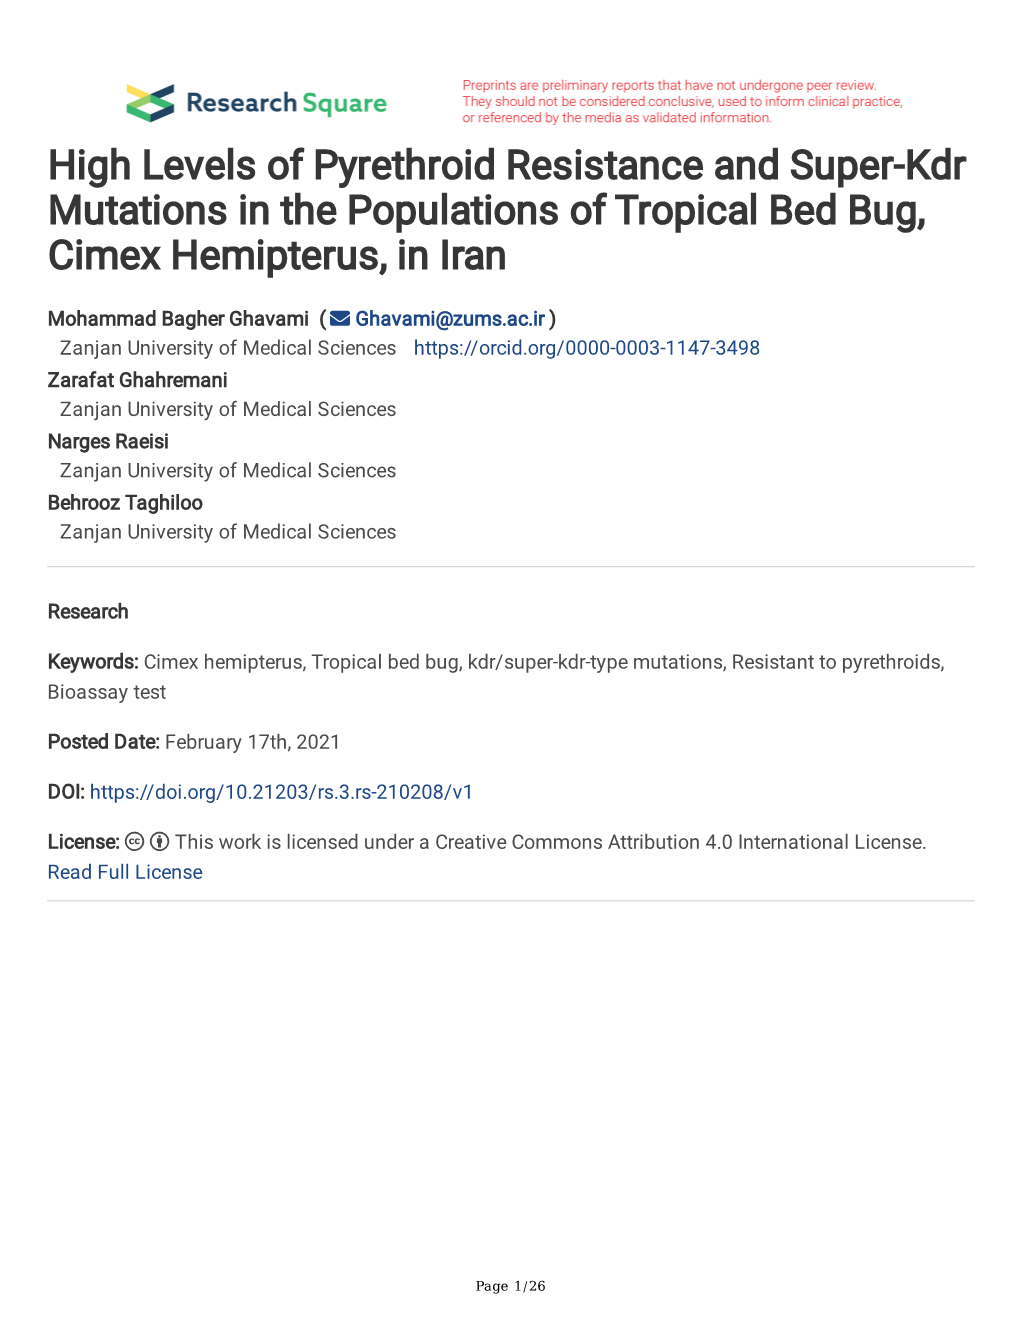 High Levels of Pyrethroid Resistance and Super-Kdr Mutations in the Populations of Tropical Bed Bug, Cimex Hemipterus, in Iran